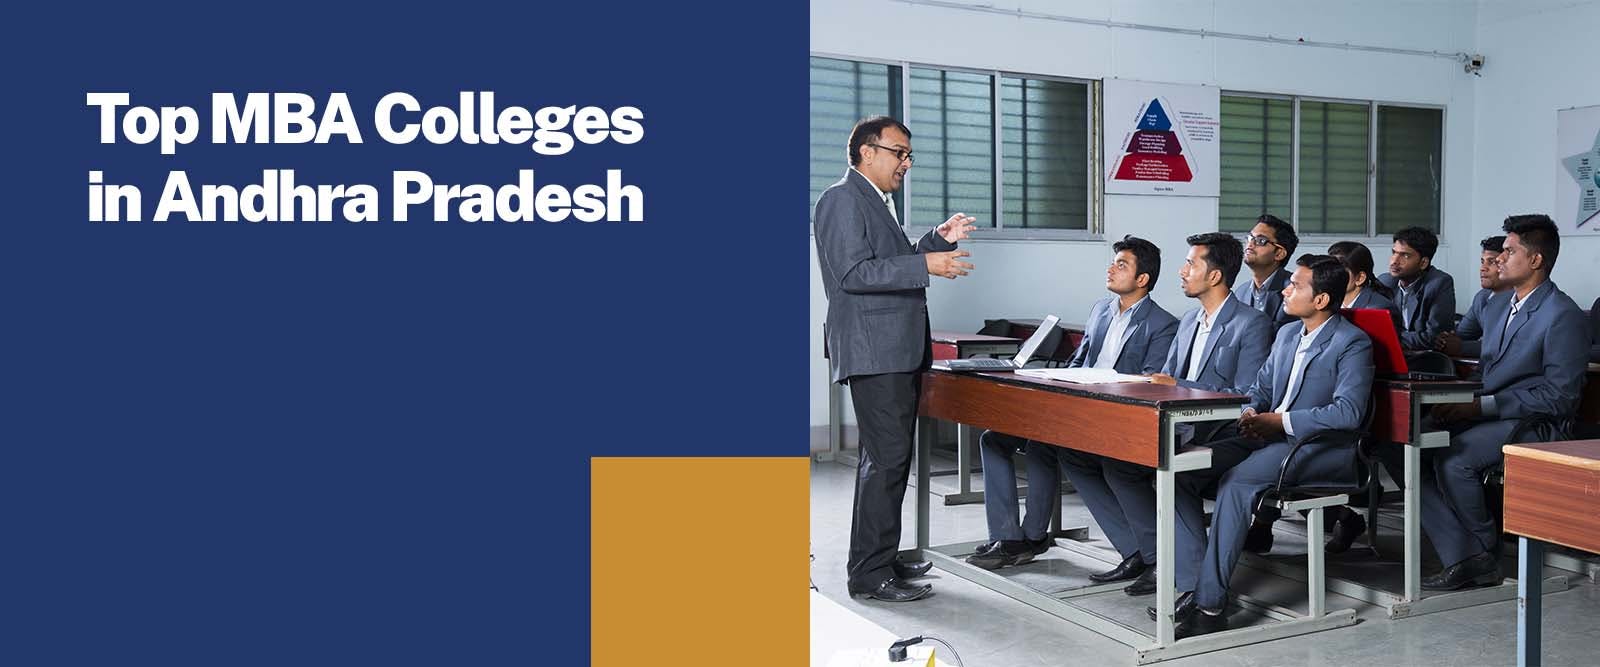 mba colleges in andhra pradesh